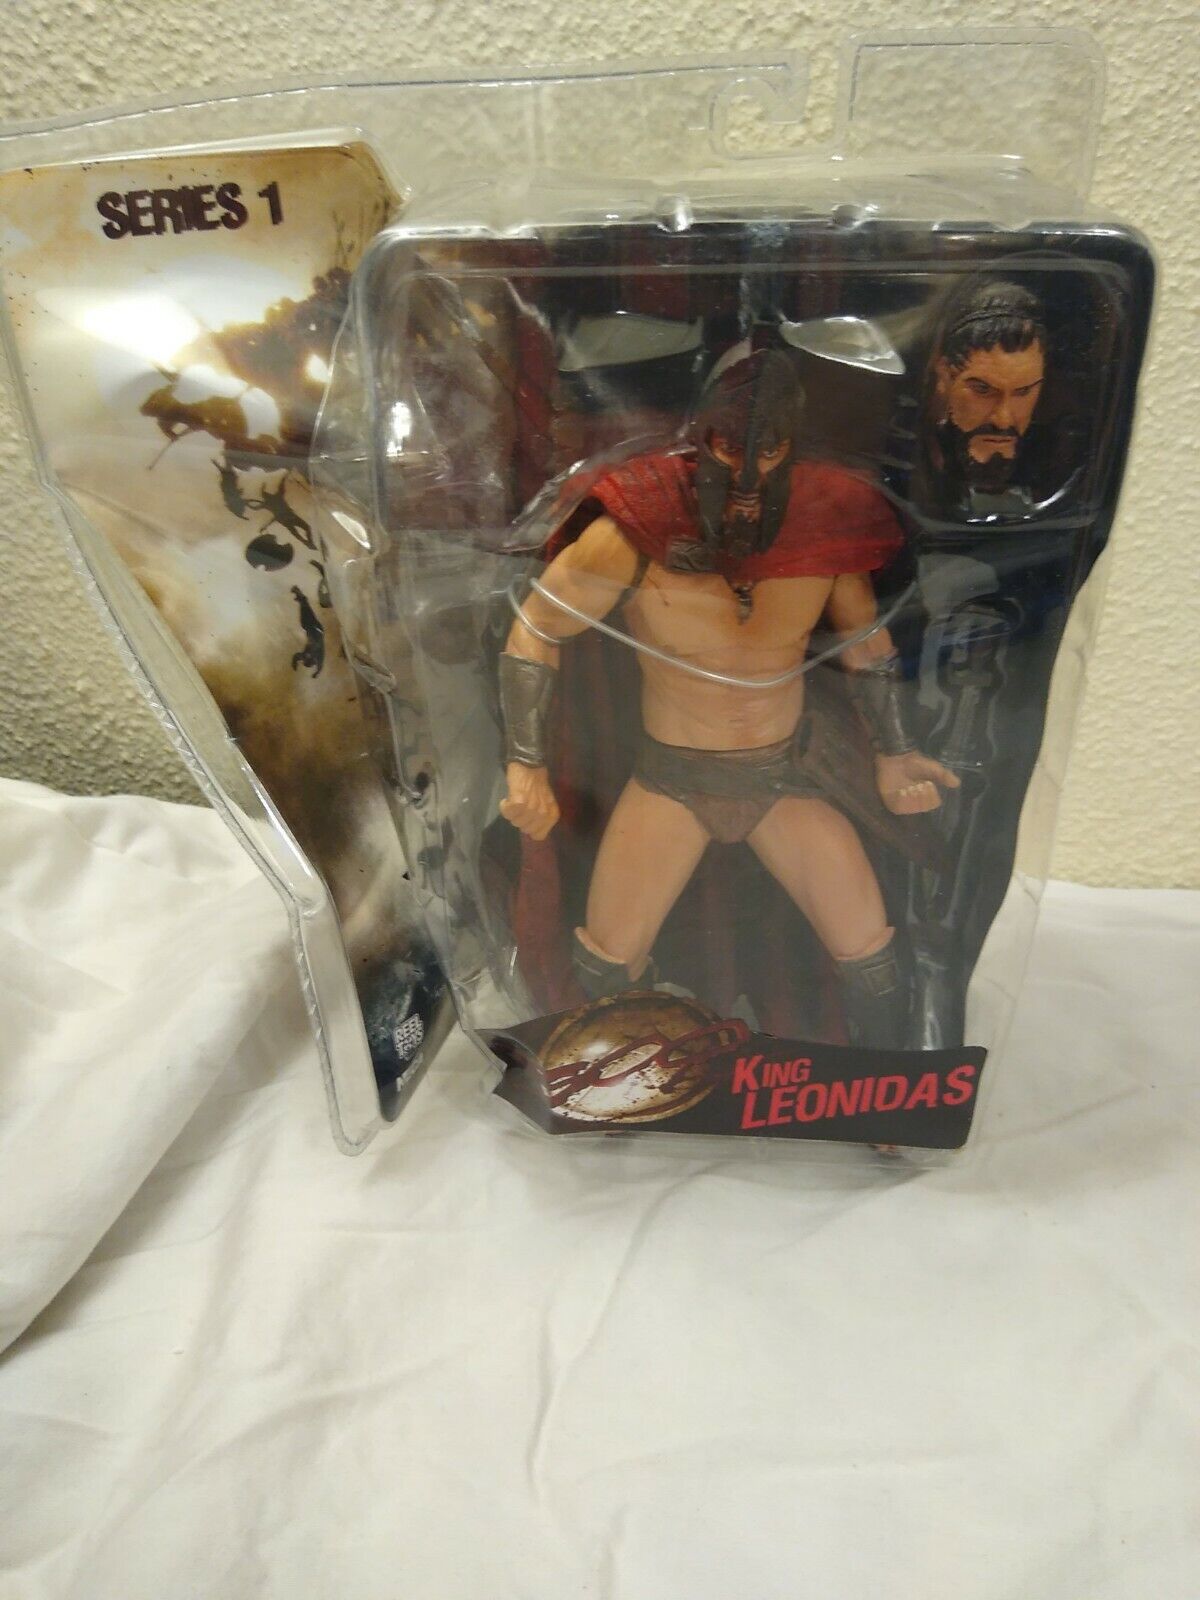 Neca1+300+Series+1%3A+King+Leonidas+Action+Figure for sale online